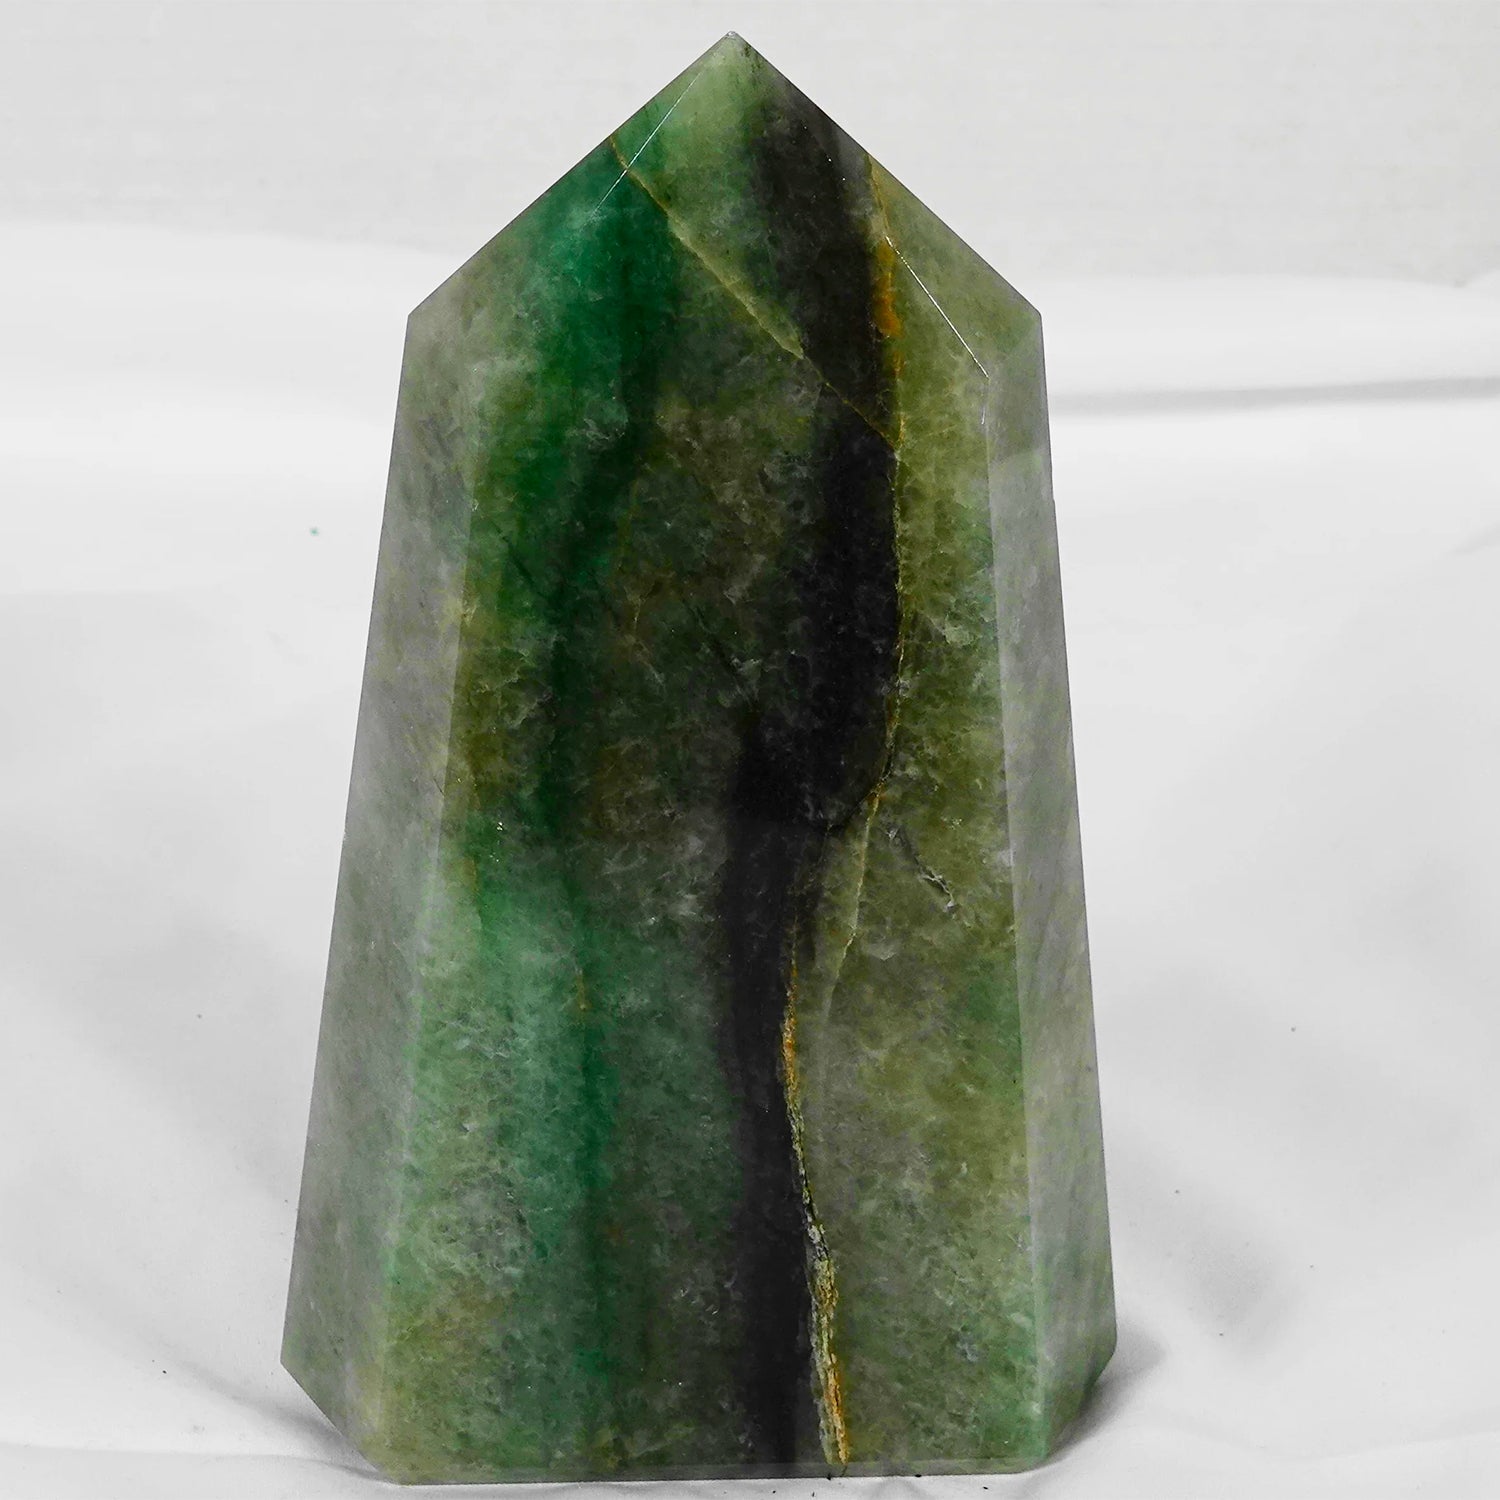 A large green tower crystal.